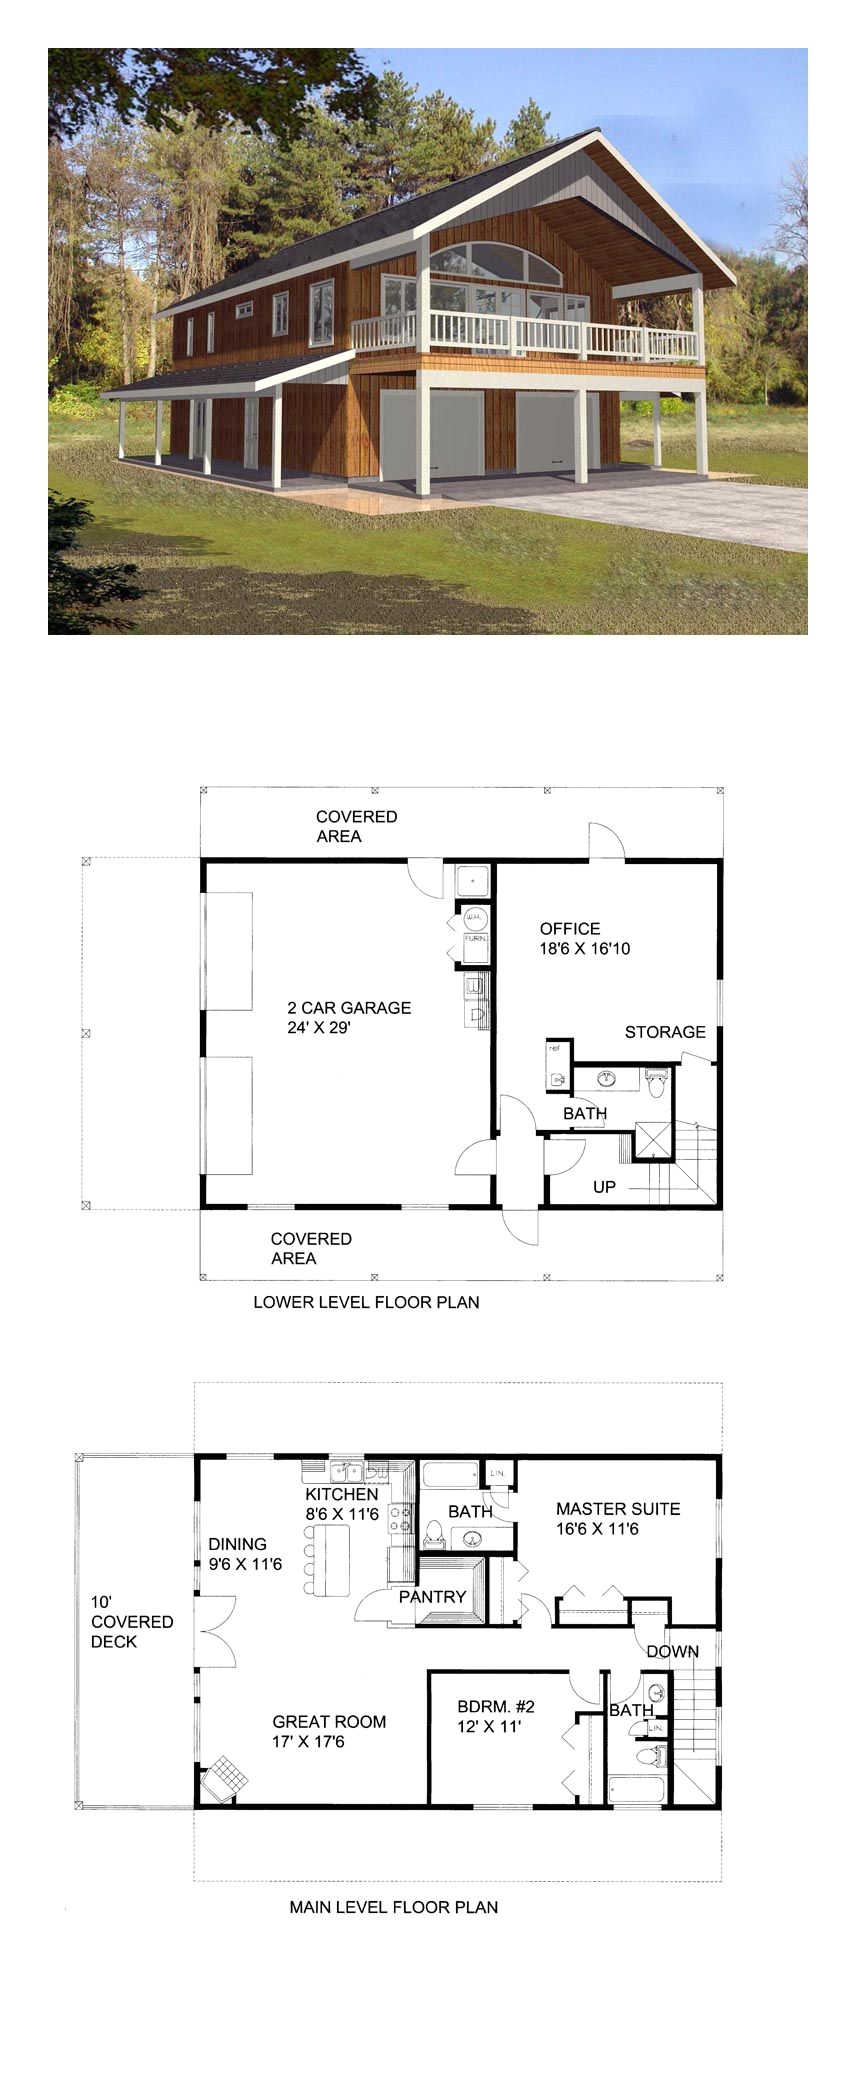 garage apartment plan 85372 total living area 1901 sq ft 2 bedrooms and 3 bathrooms carriaghouse